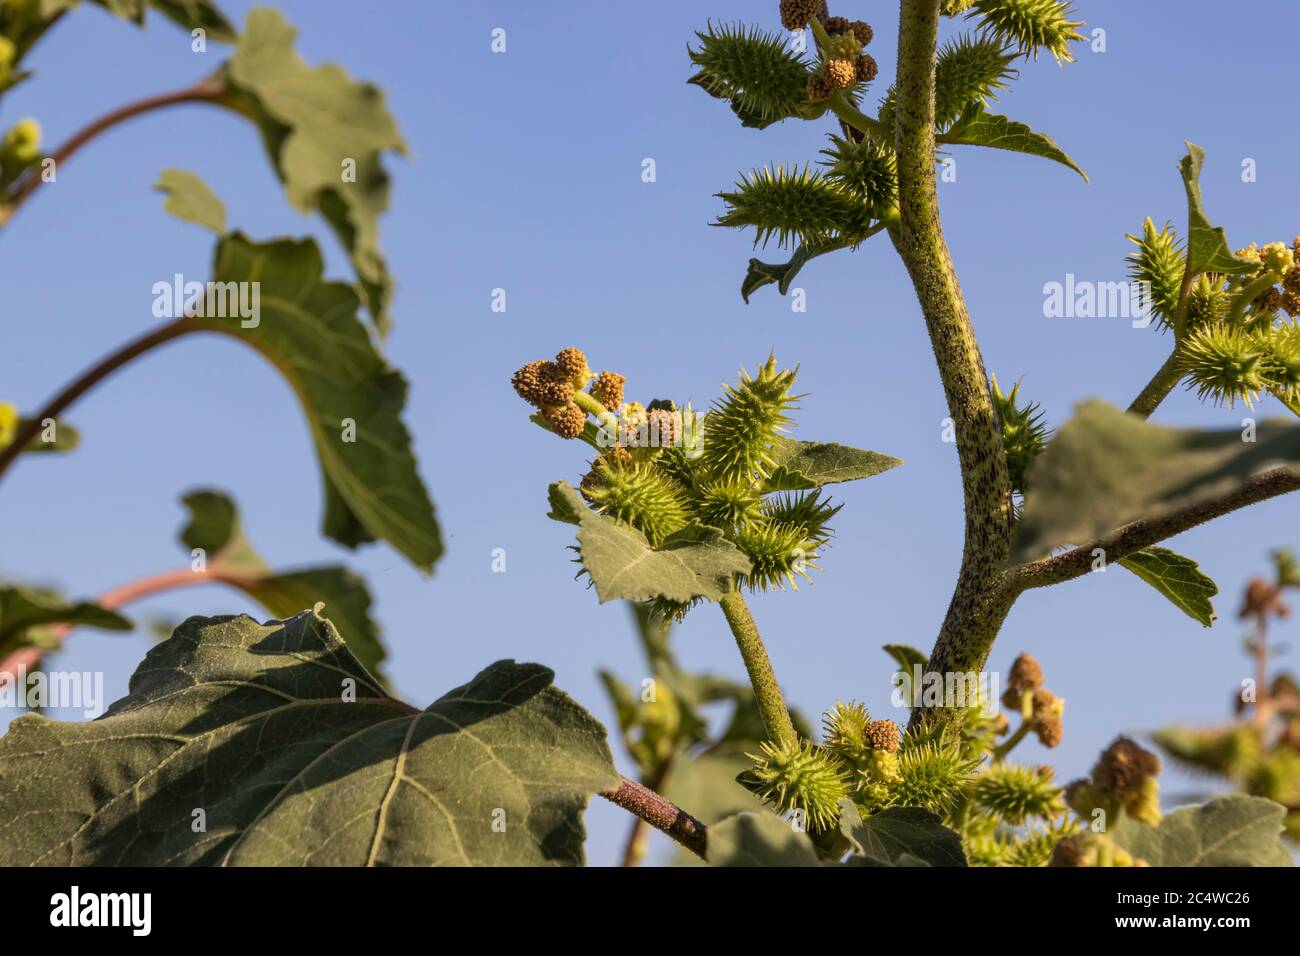 Spiky fruits and leaves of Rough cocklebur close-up against a blue sky Stock Photo